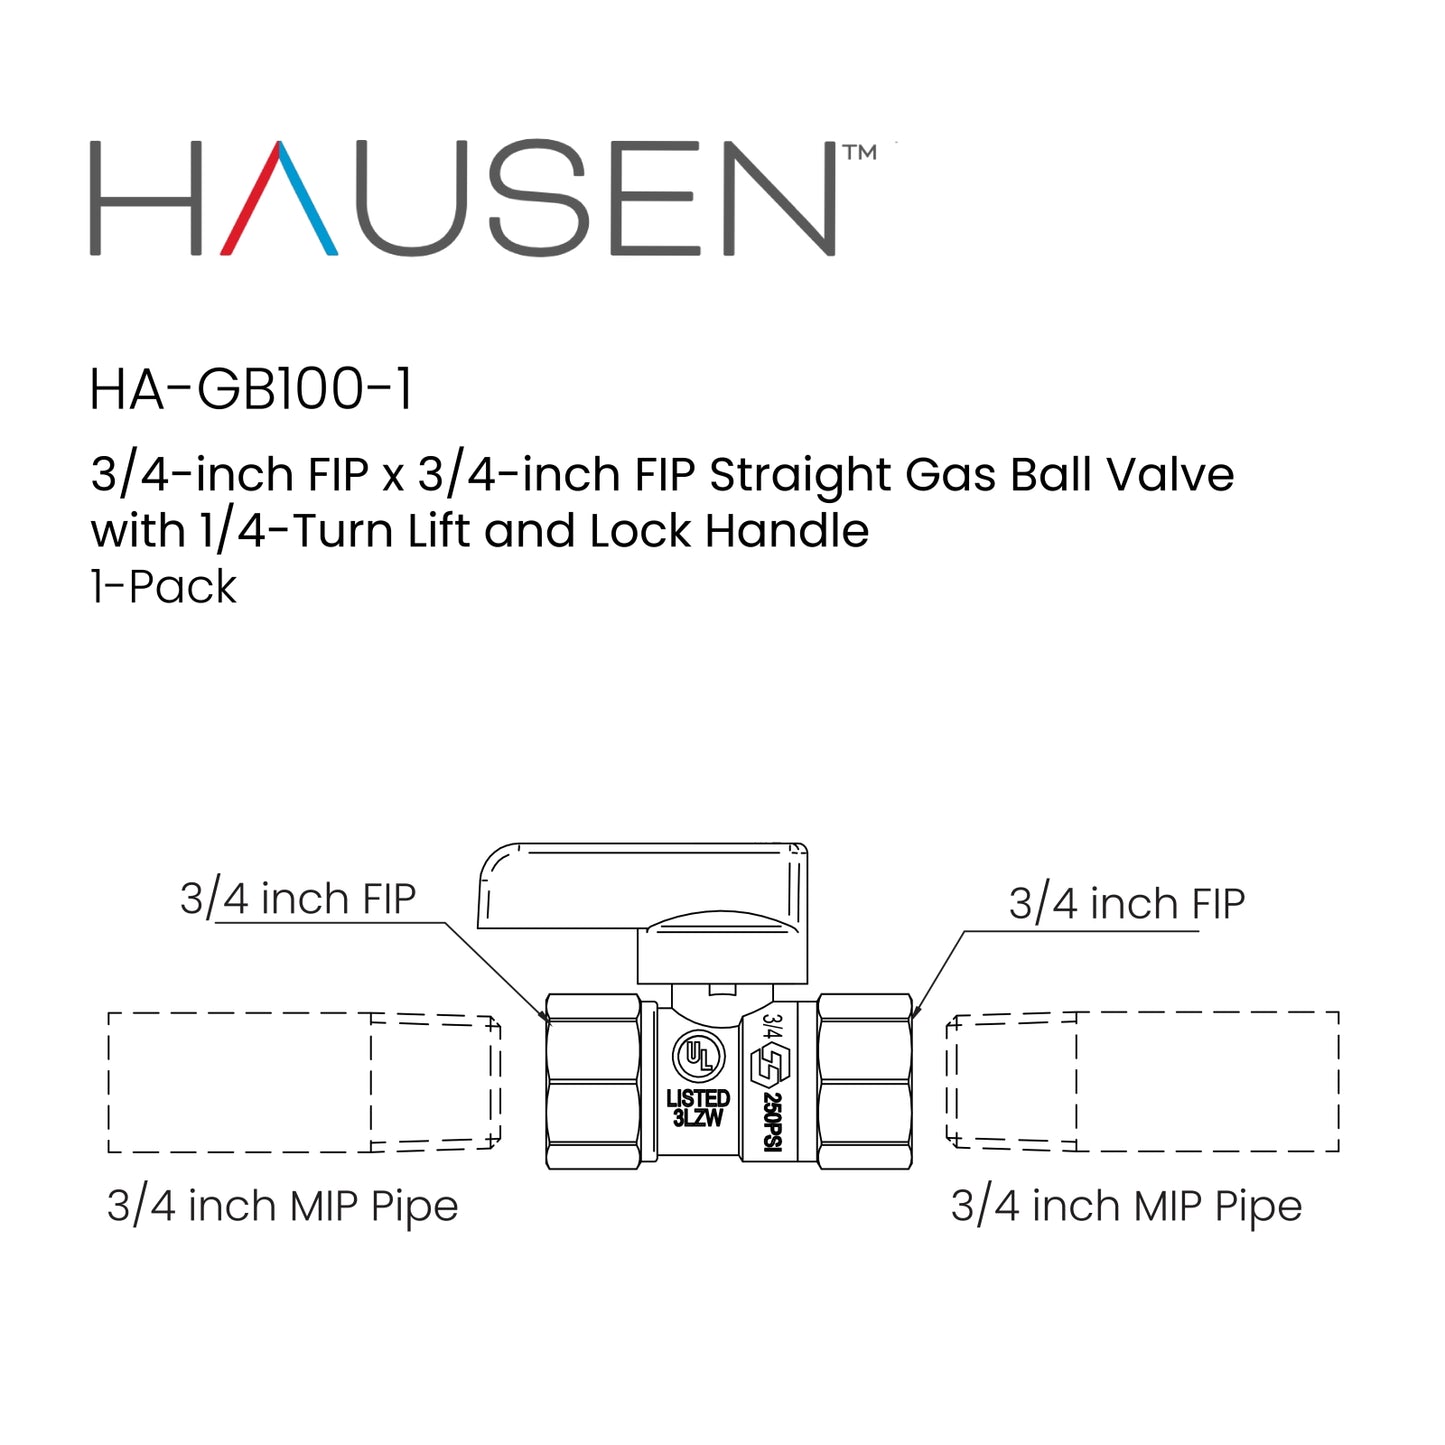 Hausen 3/4-inch FIP x 3/4-inch FIP Straight Gas Ball Valve with 1/4-Turn Lift and Lock Handle, 1-Pack